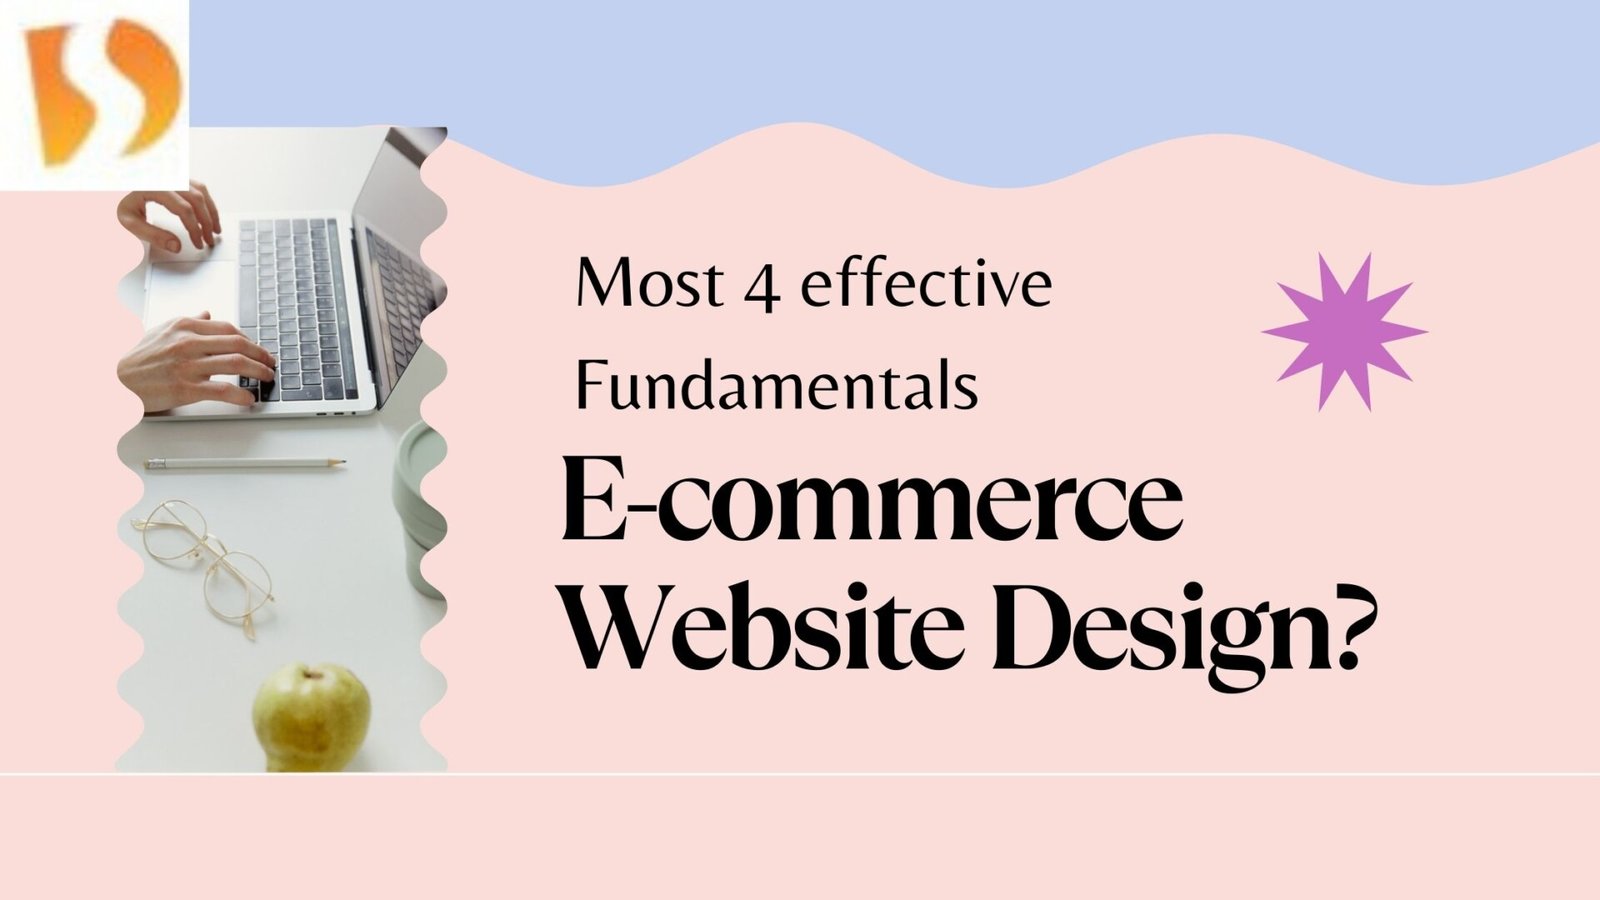 The Most 4 effective Fundamentals of E-commerce Website Design-dhanviservices